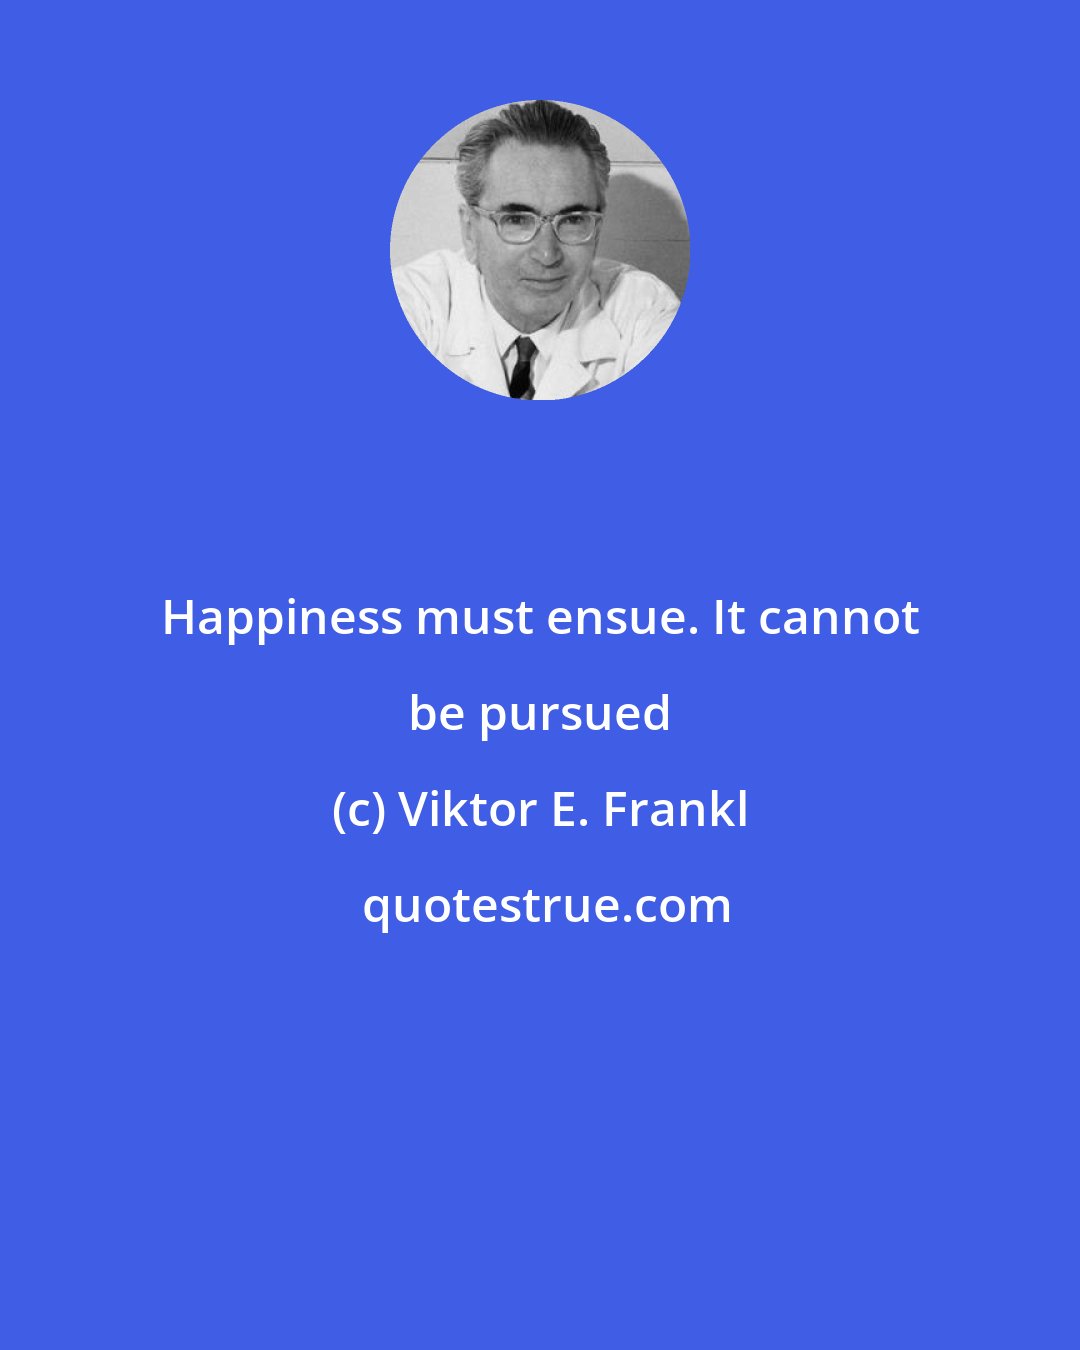 Viktor E. Frankl: Happiness must ensue. It cannot be pursued